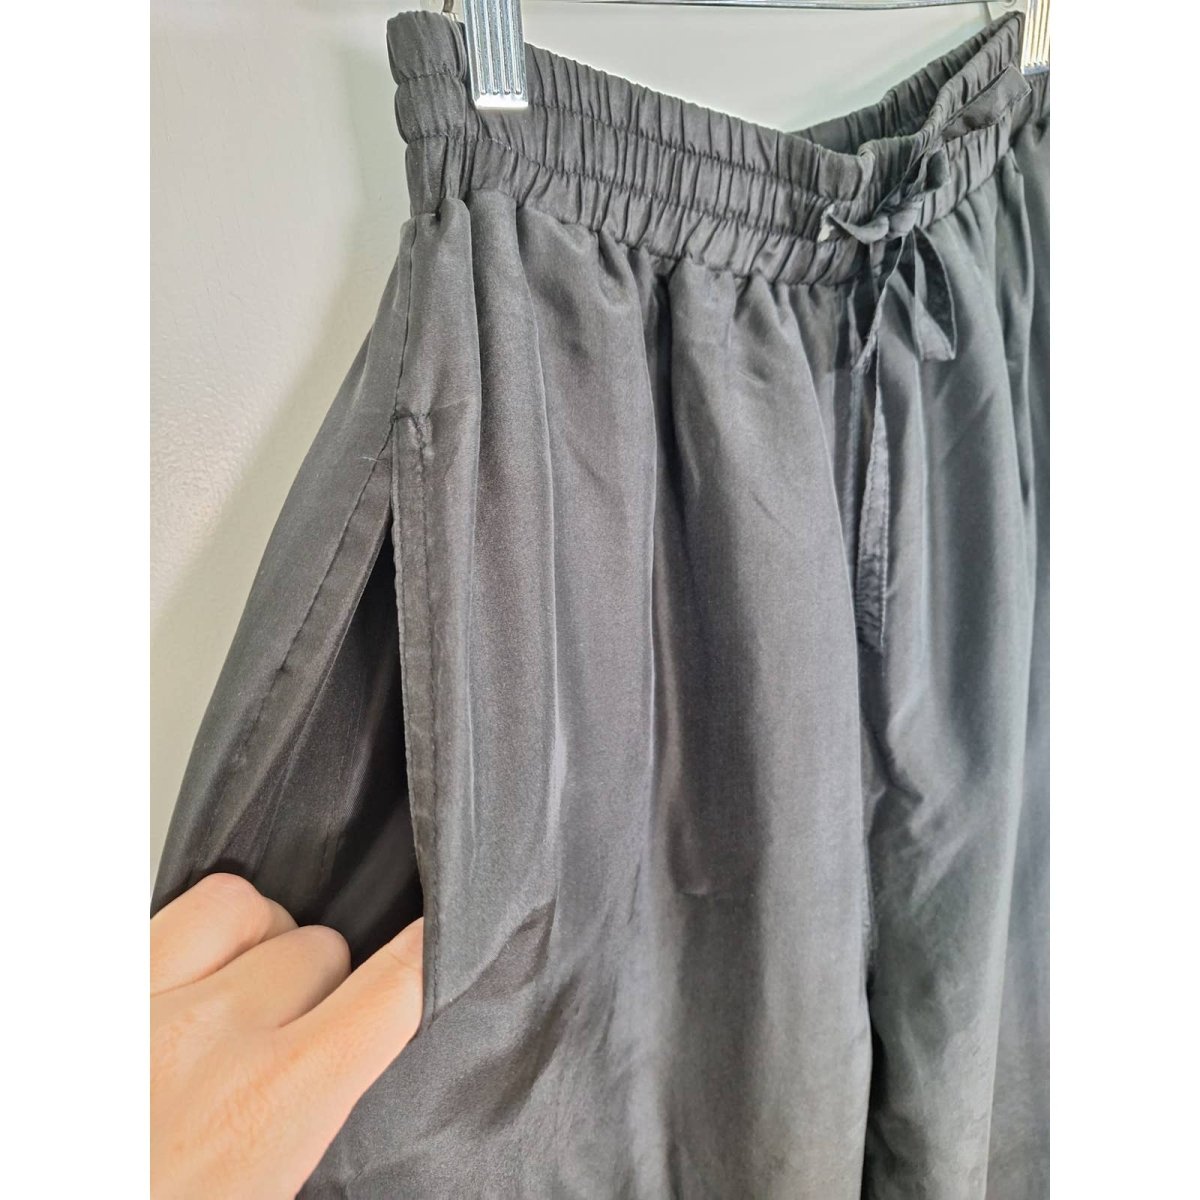 80s/90s All Silk Drawstring Pants Size M/L Waist 27-38" - themallvintage The Mall Vintage